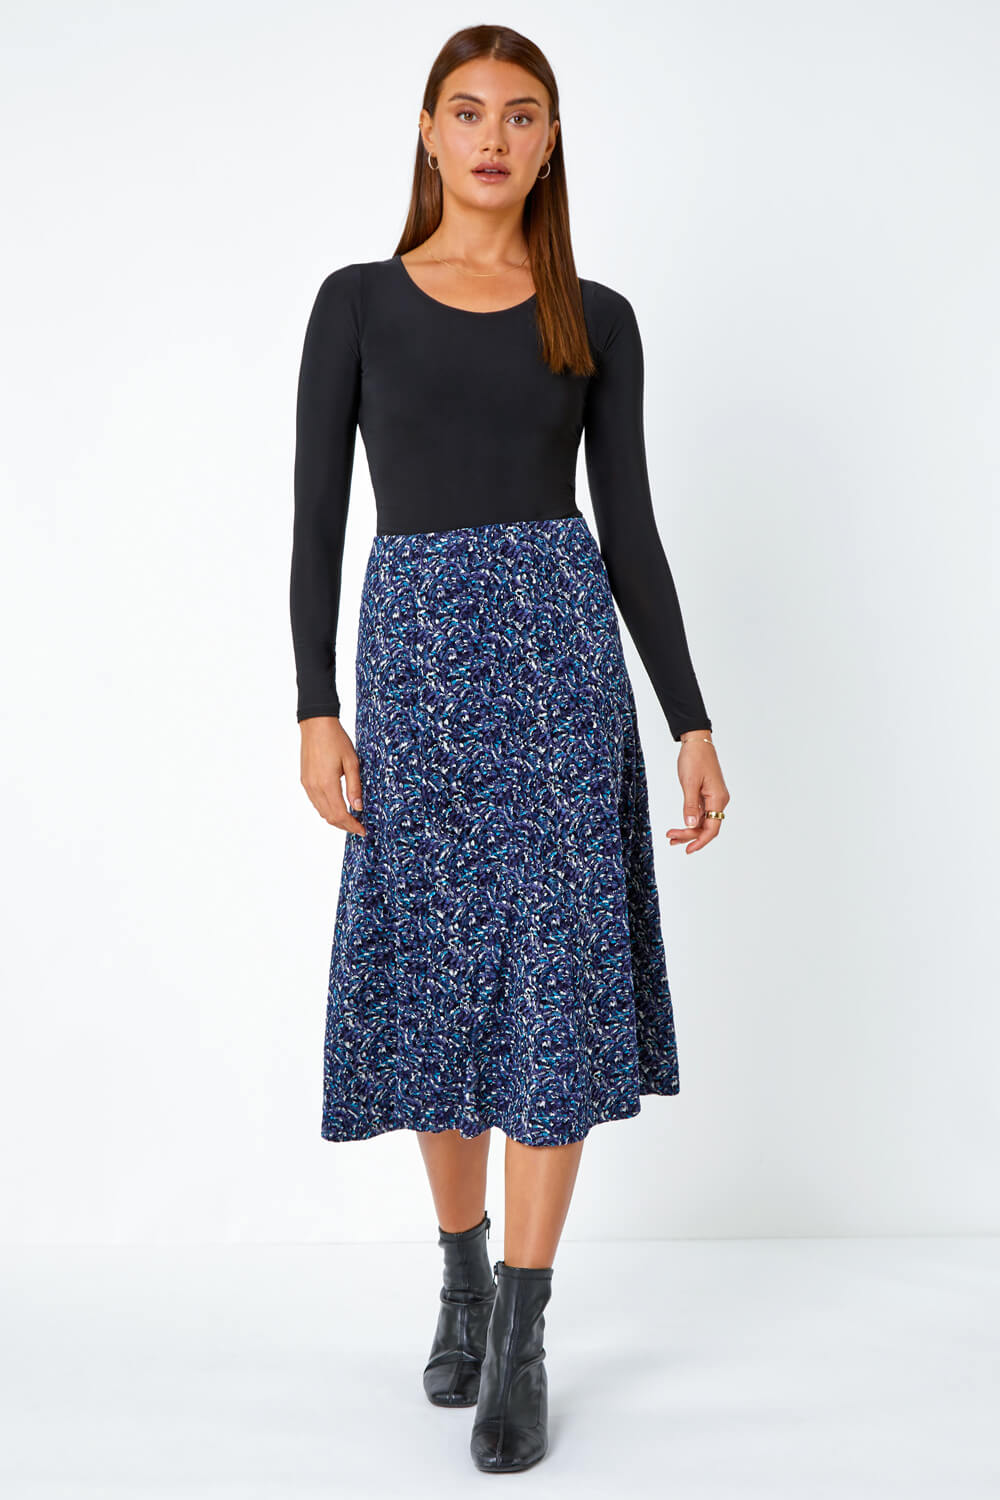 Midnight Blue Textured Abstract Print A-Line Stretch Skirt, Image 2 of 5